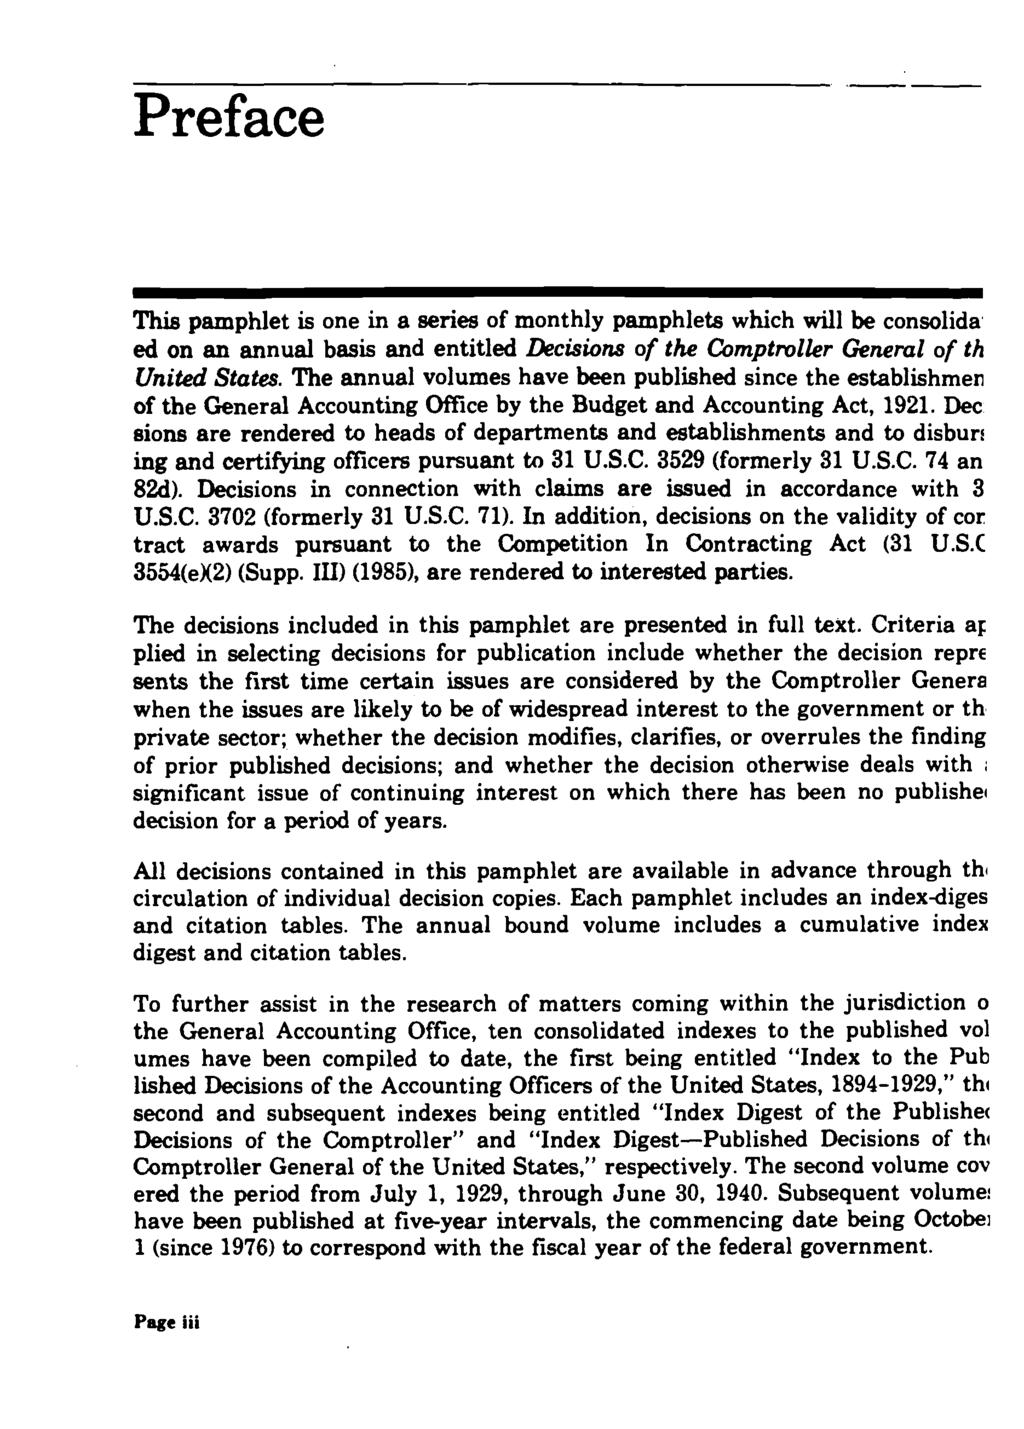 Preface This pamphlet is one in a series of monthly pamphlets which will be consolida ed on an annual basis and entitled Decisions of the Comptroller General of th United States.